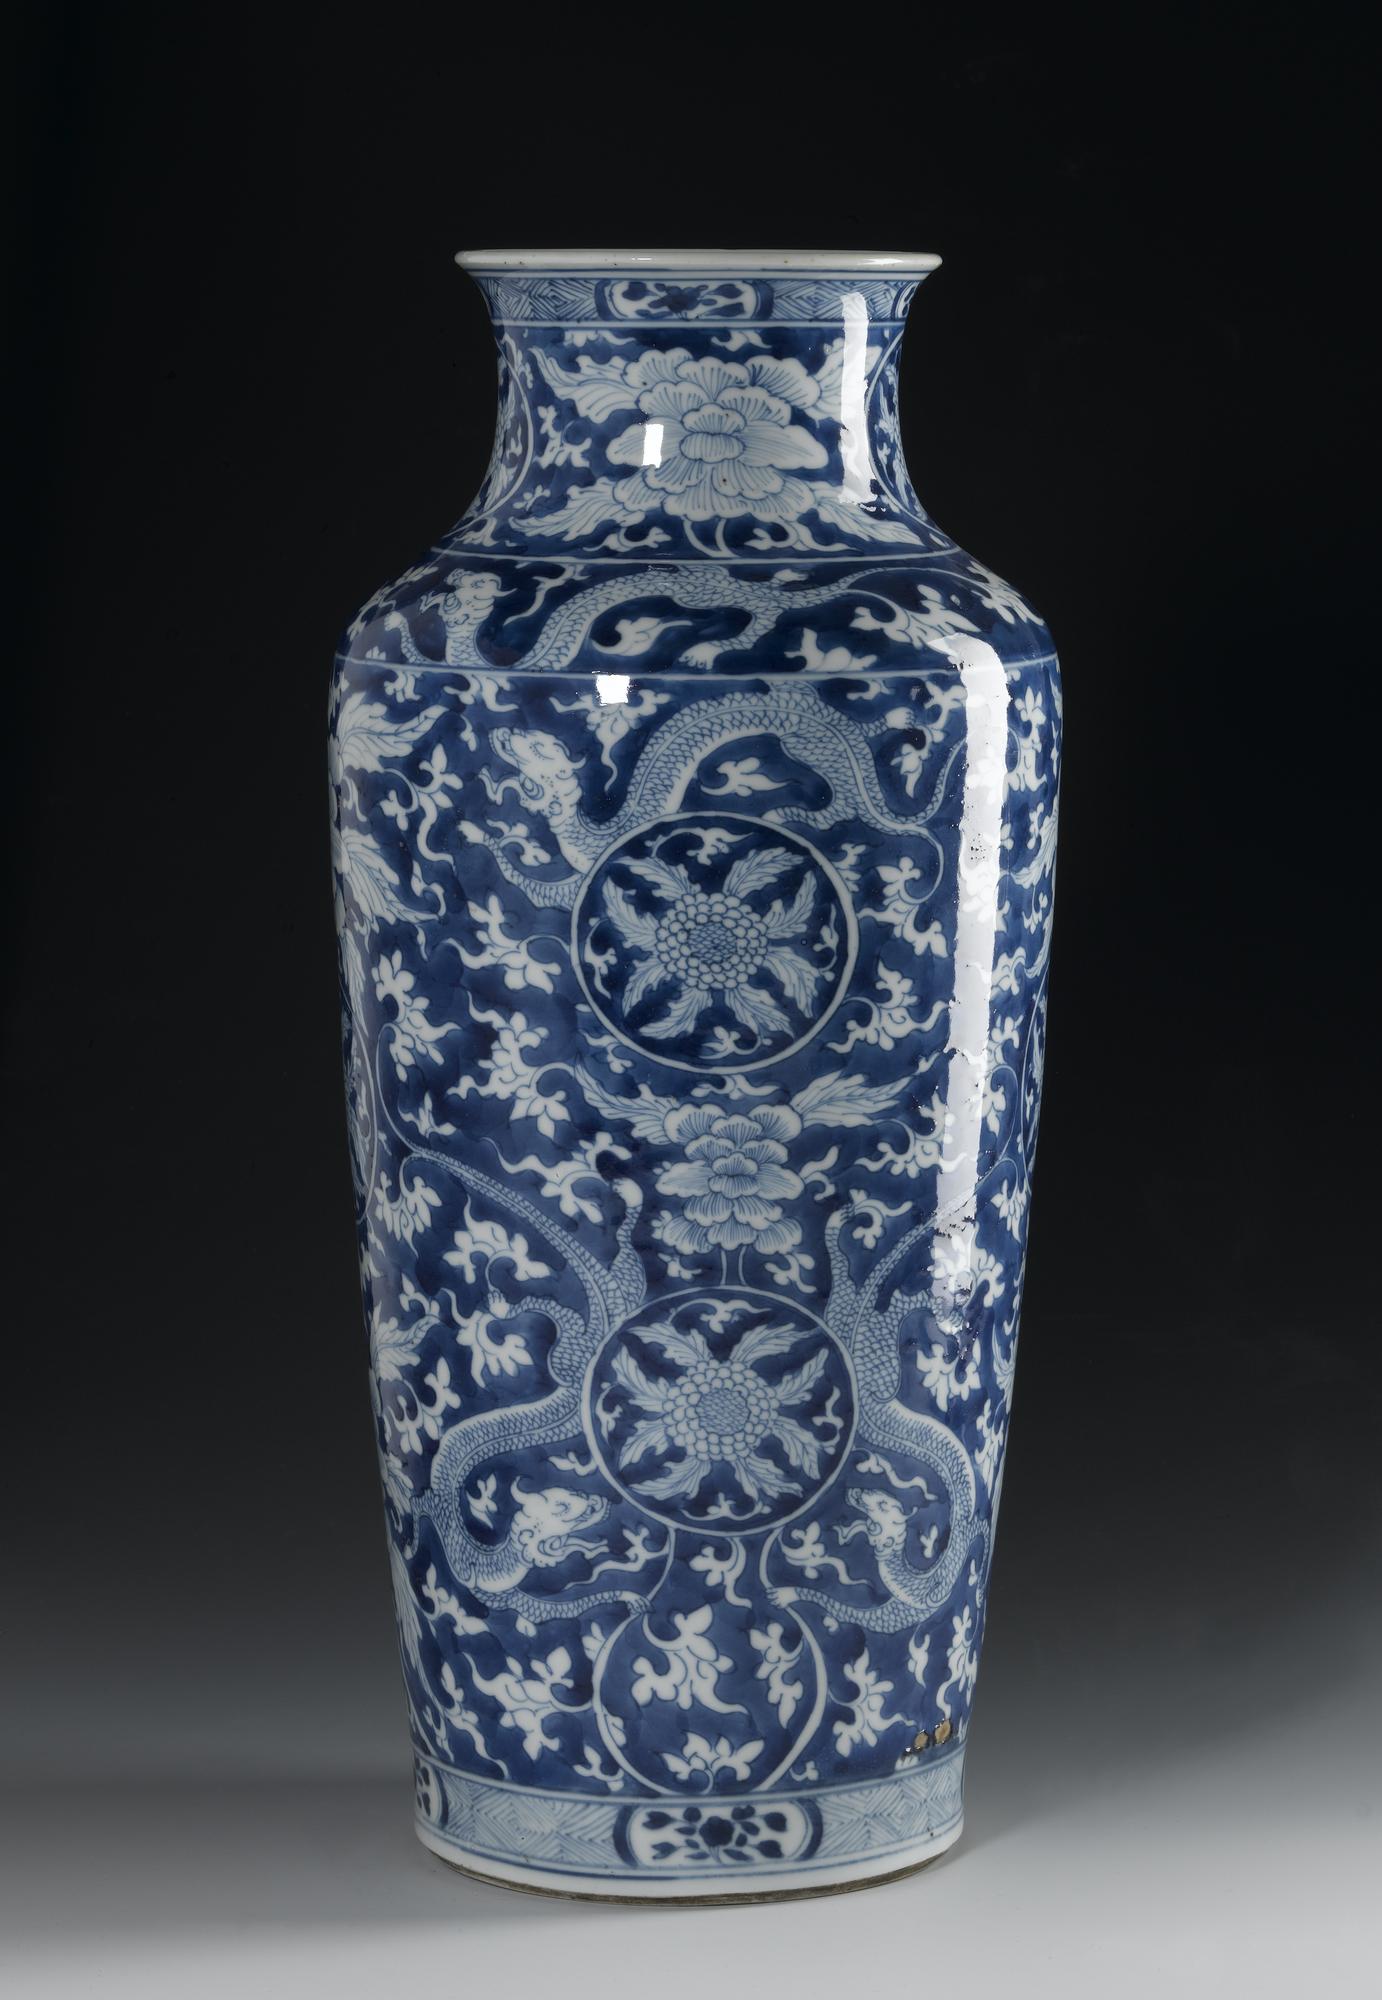 Baluster porcelain vase, decorated in underglaze blue with dragons and foliage, known as a Lizard Bottle: China, Qing dynasty, Kangxi reign, 1662-1722.